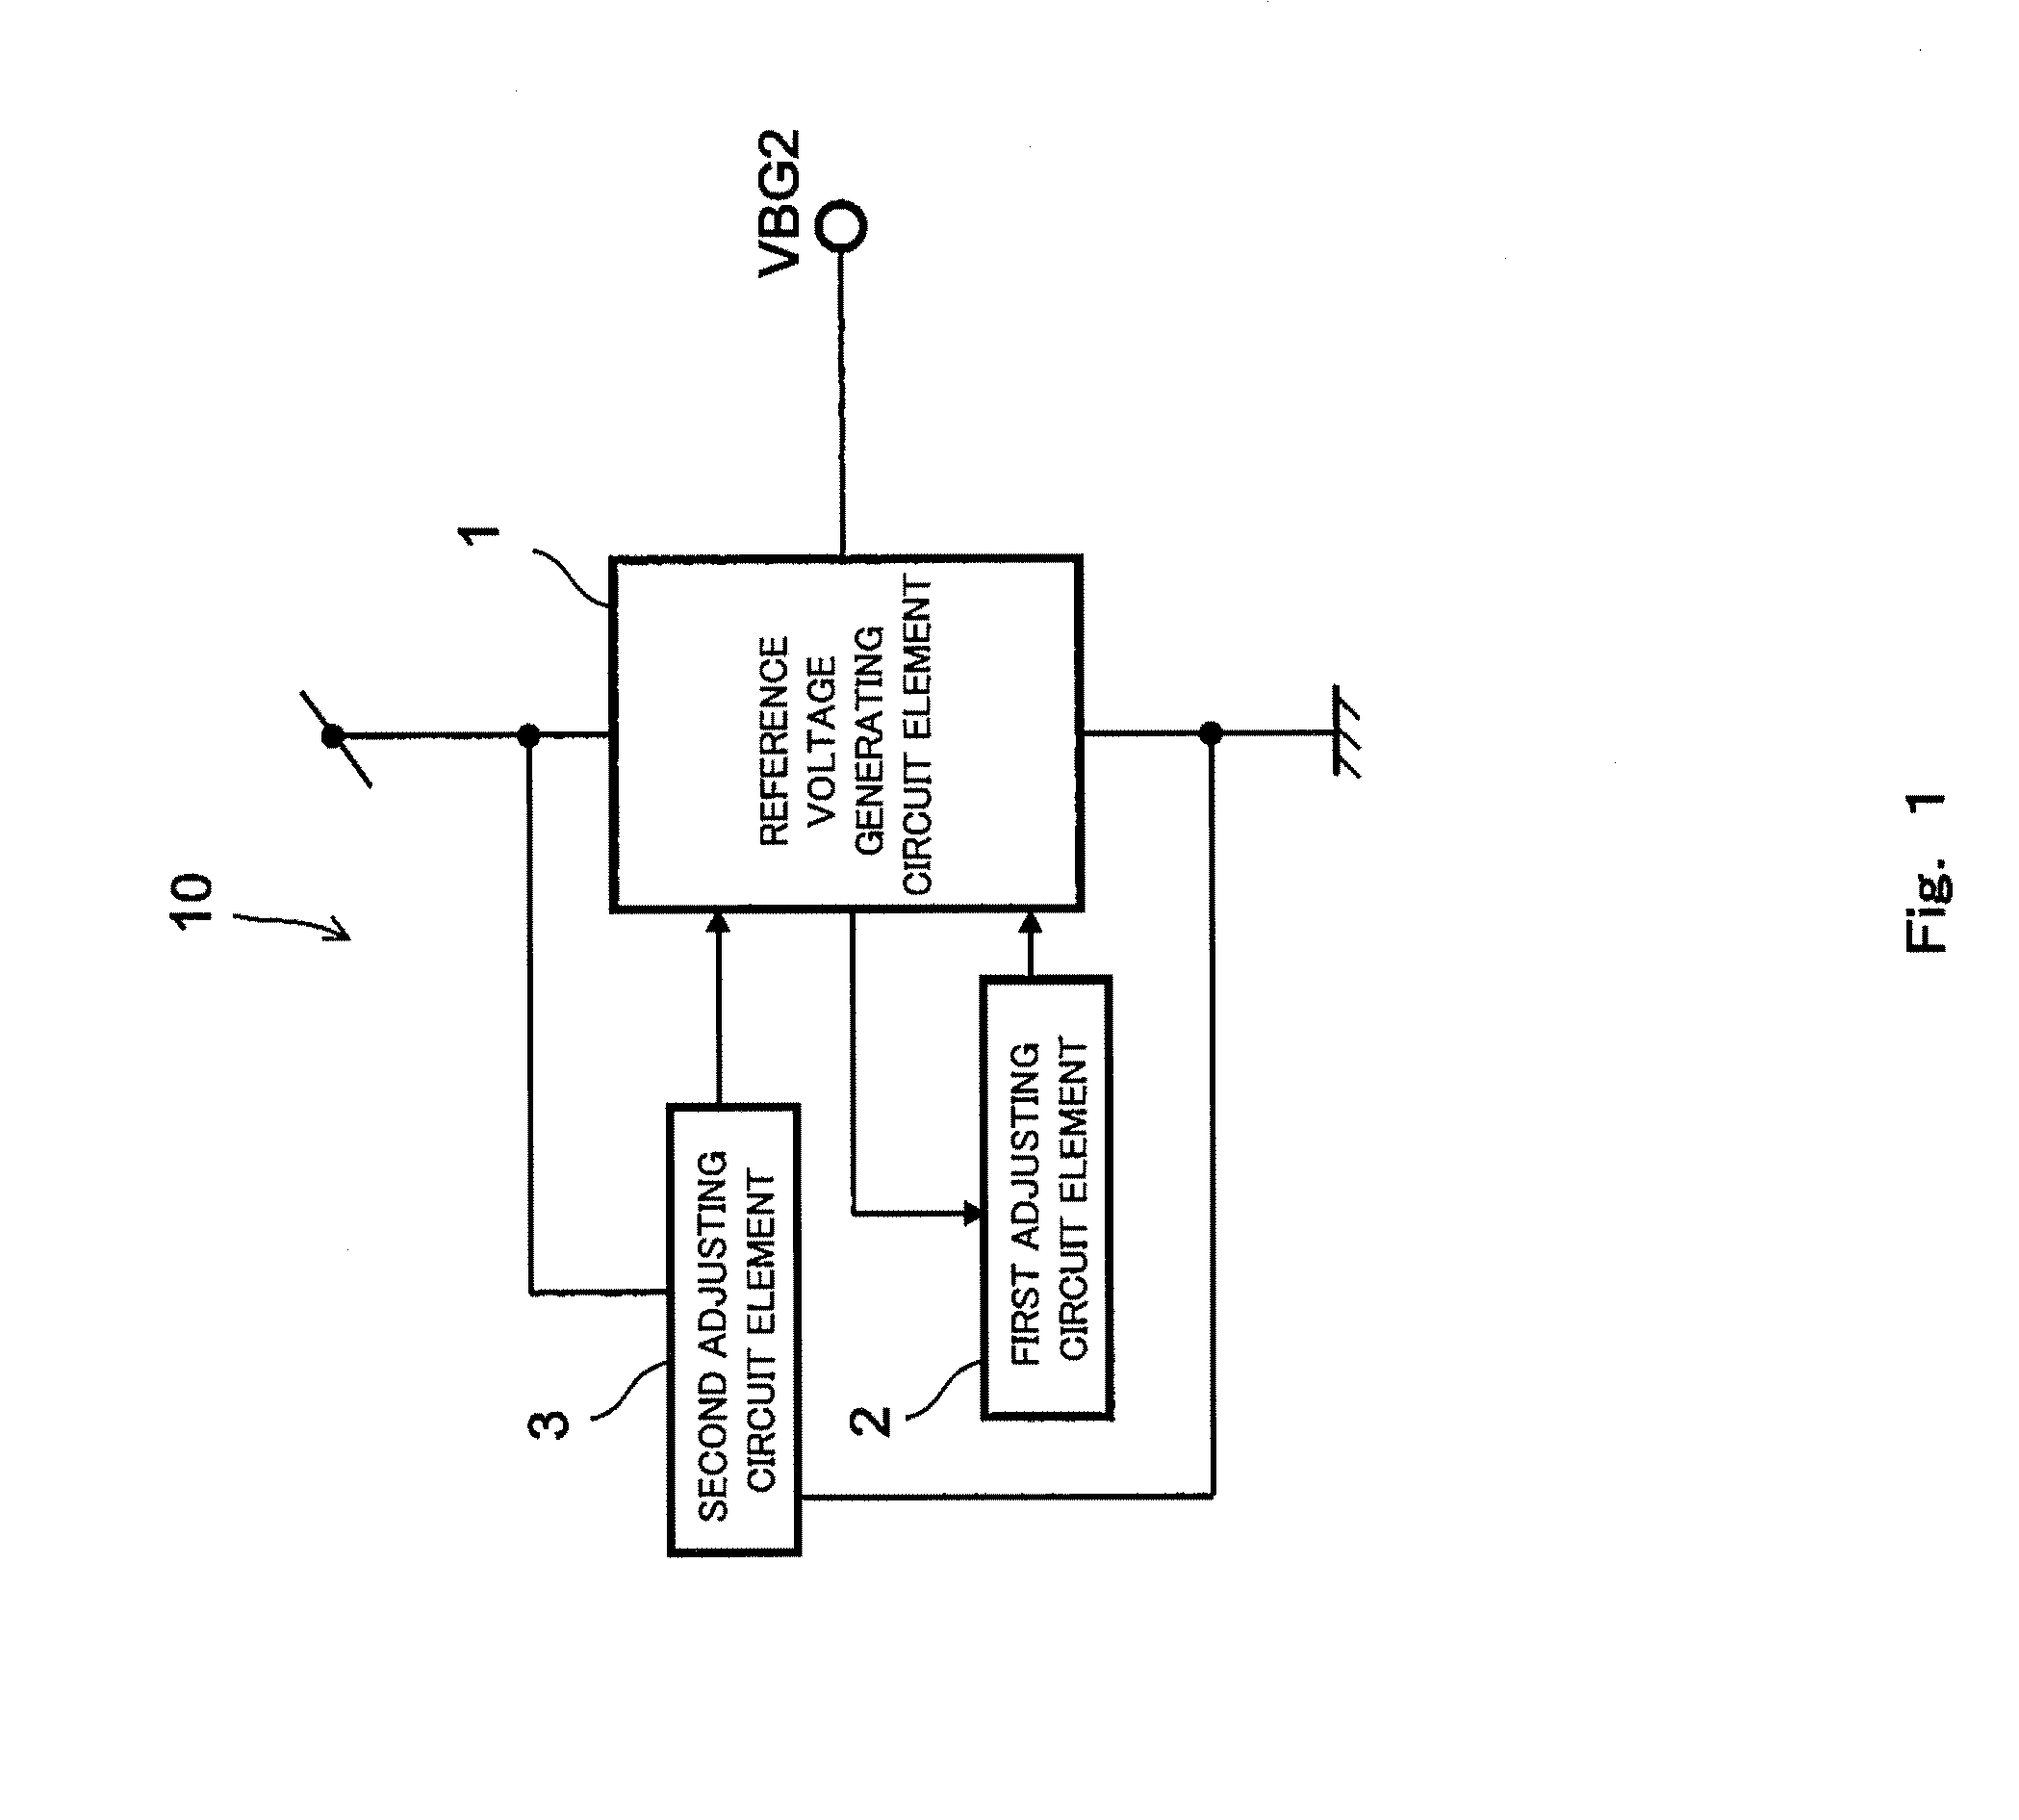 Reference voltage generating circuit and reference voltage source